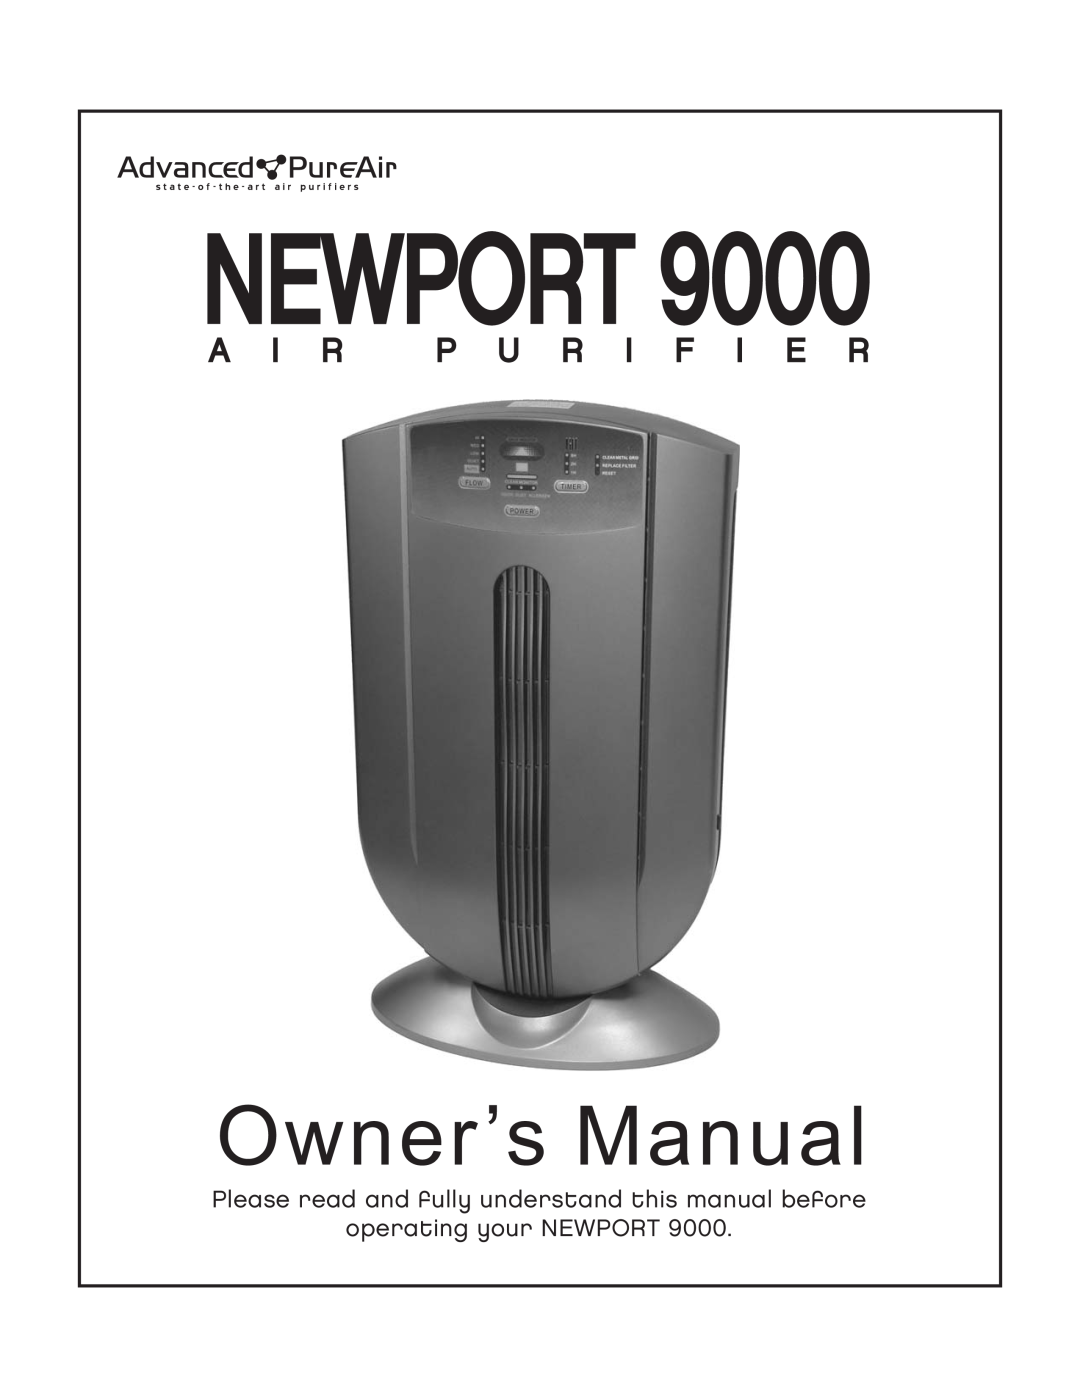 Nlynx NEWPORT 9000 owner manual Owner ’s Manual, operating your NEWPORT 